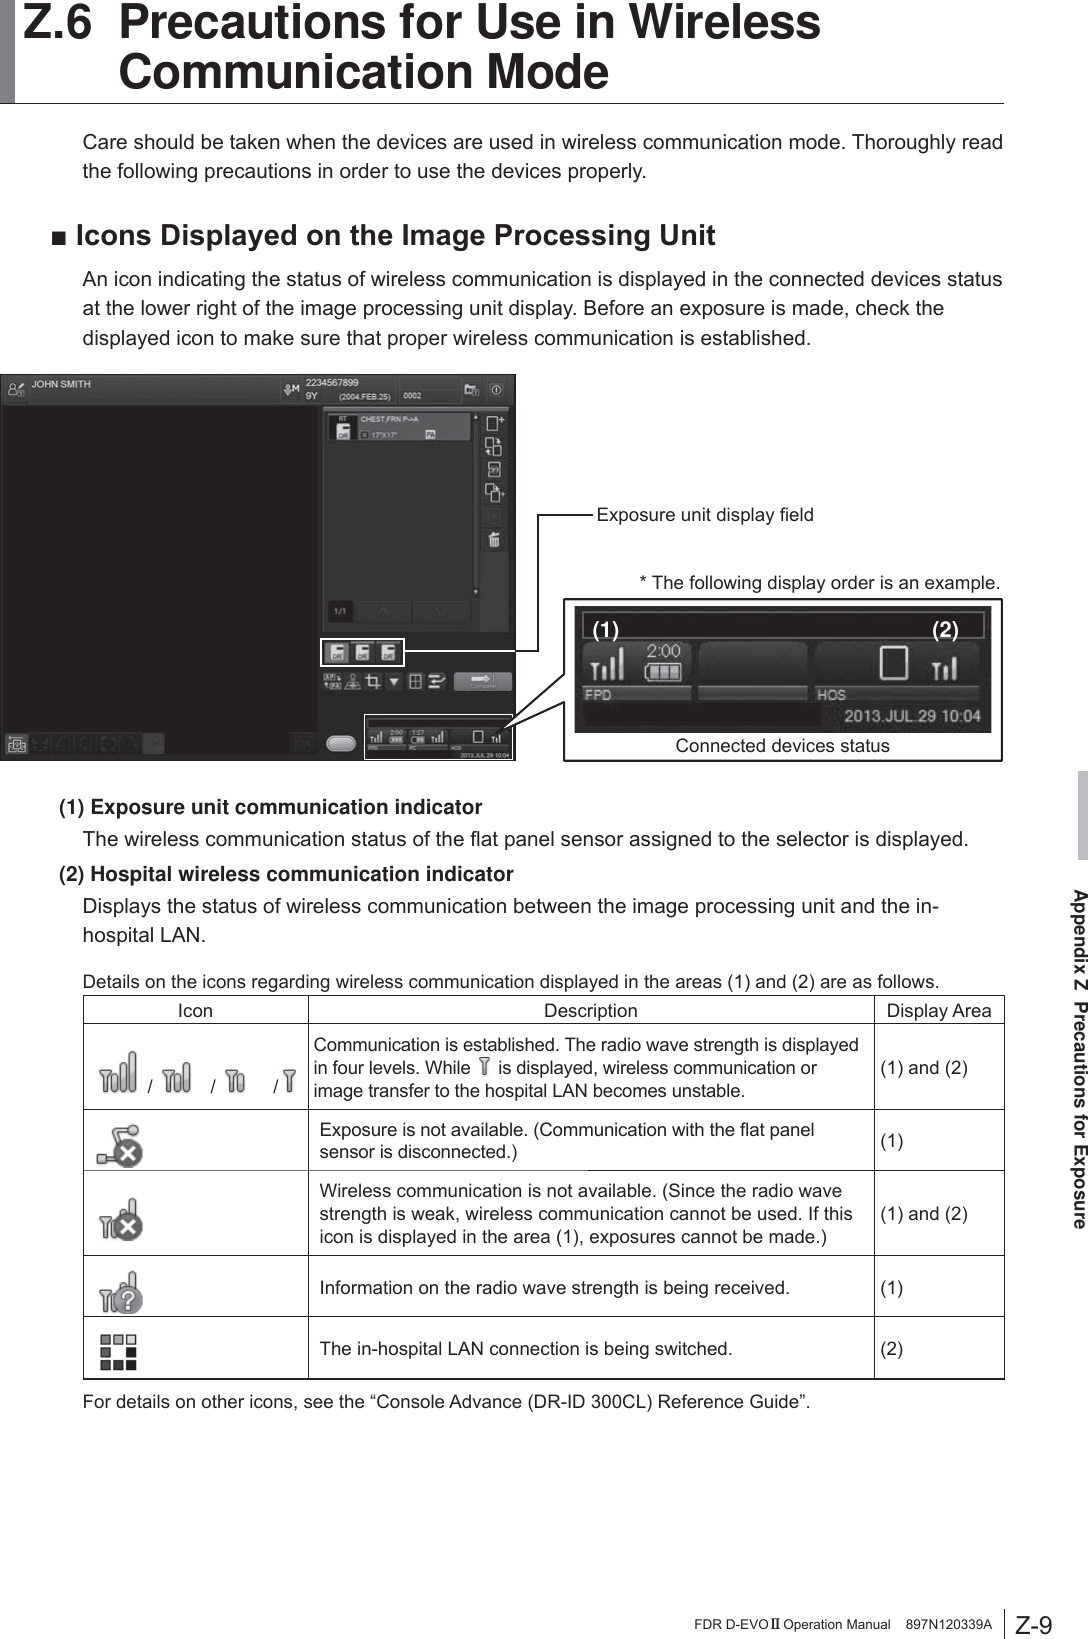 Z-9Appendix Z  Precautions for ExposureFDR D-EVO II Operation Manual    897N120339A Z.6 Precautions for Use in Wireless Communication ModeCare should be taken when the devices are used in wireless communication mode. Thoroughly read the following precautions in order to use the devices properly.Ŷ,FRQV&apos;LVSOD\HGRQWKH,PDJH3URFHVVLQJ8QLWAn icon indicating the status of wireless communication is displayed in the connected devices status at the lower right of the image processing unit display. Before an exposure is made, check the displayed icon to make sure that proper wireless communication is established.Connected devices status(2)(1)* The following display order is an example.([SRVXUHXQLWGLVSOD\¿HOG(1) Exposure unit communication indicator7KHZLUHOHVVFRPPXQLFDWLRQVWDWXVRIWKHÀDWSDQHOVHQVRUDVVLJQHGWRWKHVHOHFWRULVGLVSOD\HG(2) Hospital wireless communication indicator Displays the status of wireless communication between the image processing unit and the in-hospital LAN.Details on the icons regarding wireless communication displayed in the areas (1) and (2) are as follows.Icon Description Display Area /   /   /Communication is established. The radio wave strength is displayed in four levels. While   is displayed, wireless communication or image transfer to the hospital LAN becomes unstable.(1) and (2) ([SRVXUHLVQRWDYDLODEOH&amp;RPPXQLFDWLRQZLWKWKHÀDWSDQHOsensor is disconnected.) (1)Wireless communication is not available. (Since the radio wave strength is weak, wireless communication cannot be used. If this icon is displayed in the area (1), exposures cannot be made.)(1) and (2) Information on the radio wave strength is being received. (1)The in-hospital LAN connection is being switched. (2)For details on other icons, see the “Console Advance (DR-ID 300CL) Reference Guide”.